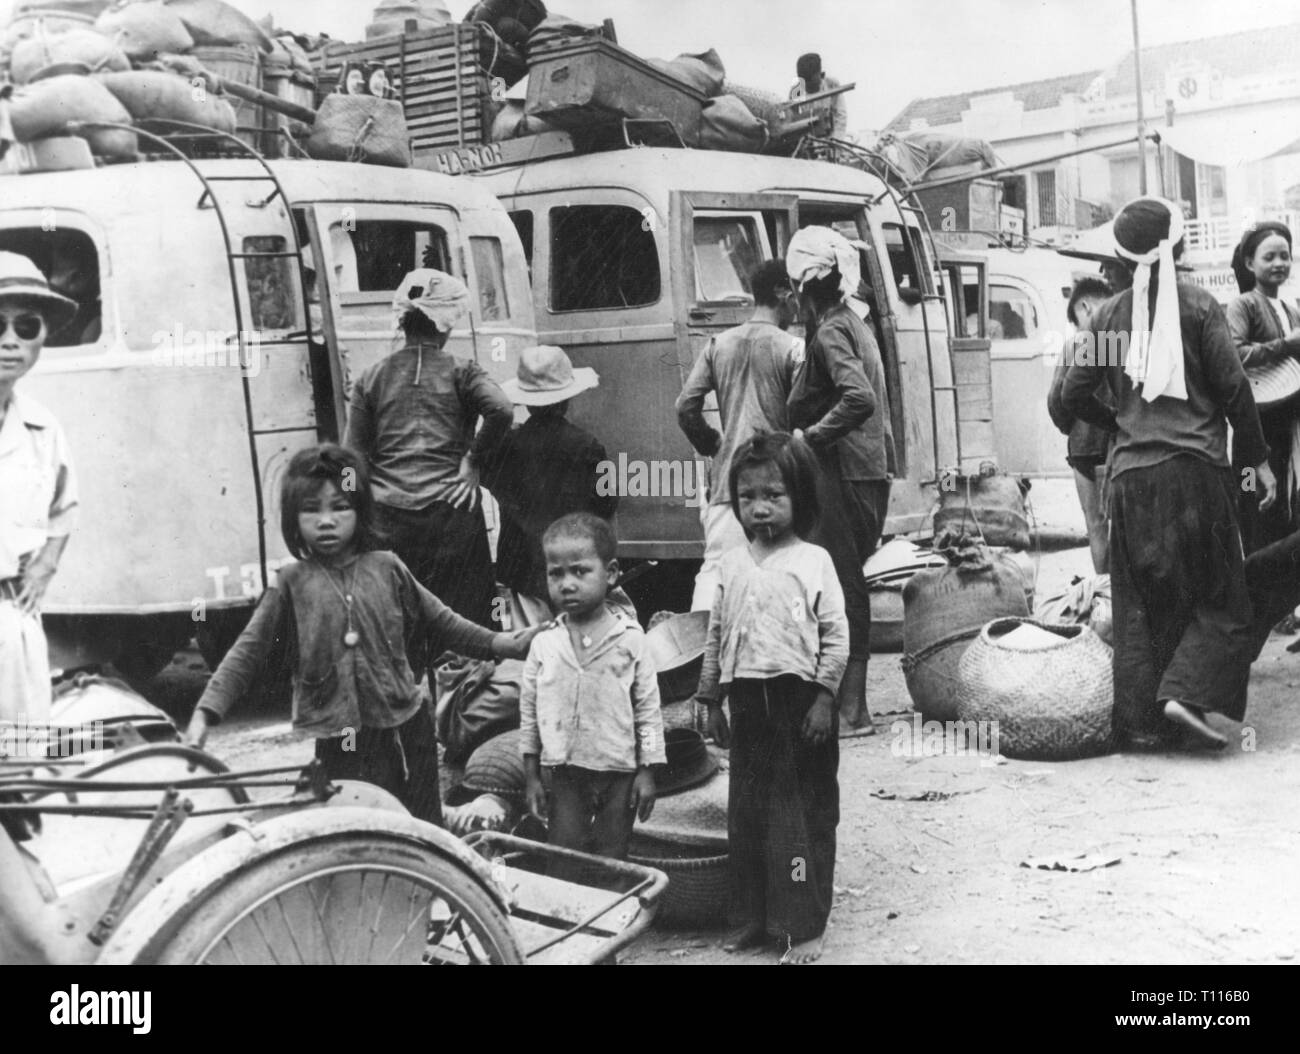 Indochina War 1946 - 1954, clearing of the Delta of the Red River, evacuation the populace by Nam Dinh, North Vietnam, 11.7.1954, civilian, civilians, refugee, refugees, flight, children, child, kids, kid, buses, busses, bus, baggage, luggage, Viet Nam, Vietnam, Indochina, people, 20th century, 1950s, river, rivers, evacuation, evacuations, historic, historical, Additional-Rights-Clearance-Info-Not-Available Stock Photo